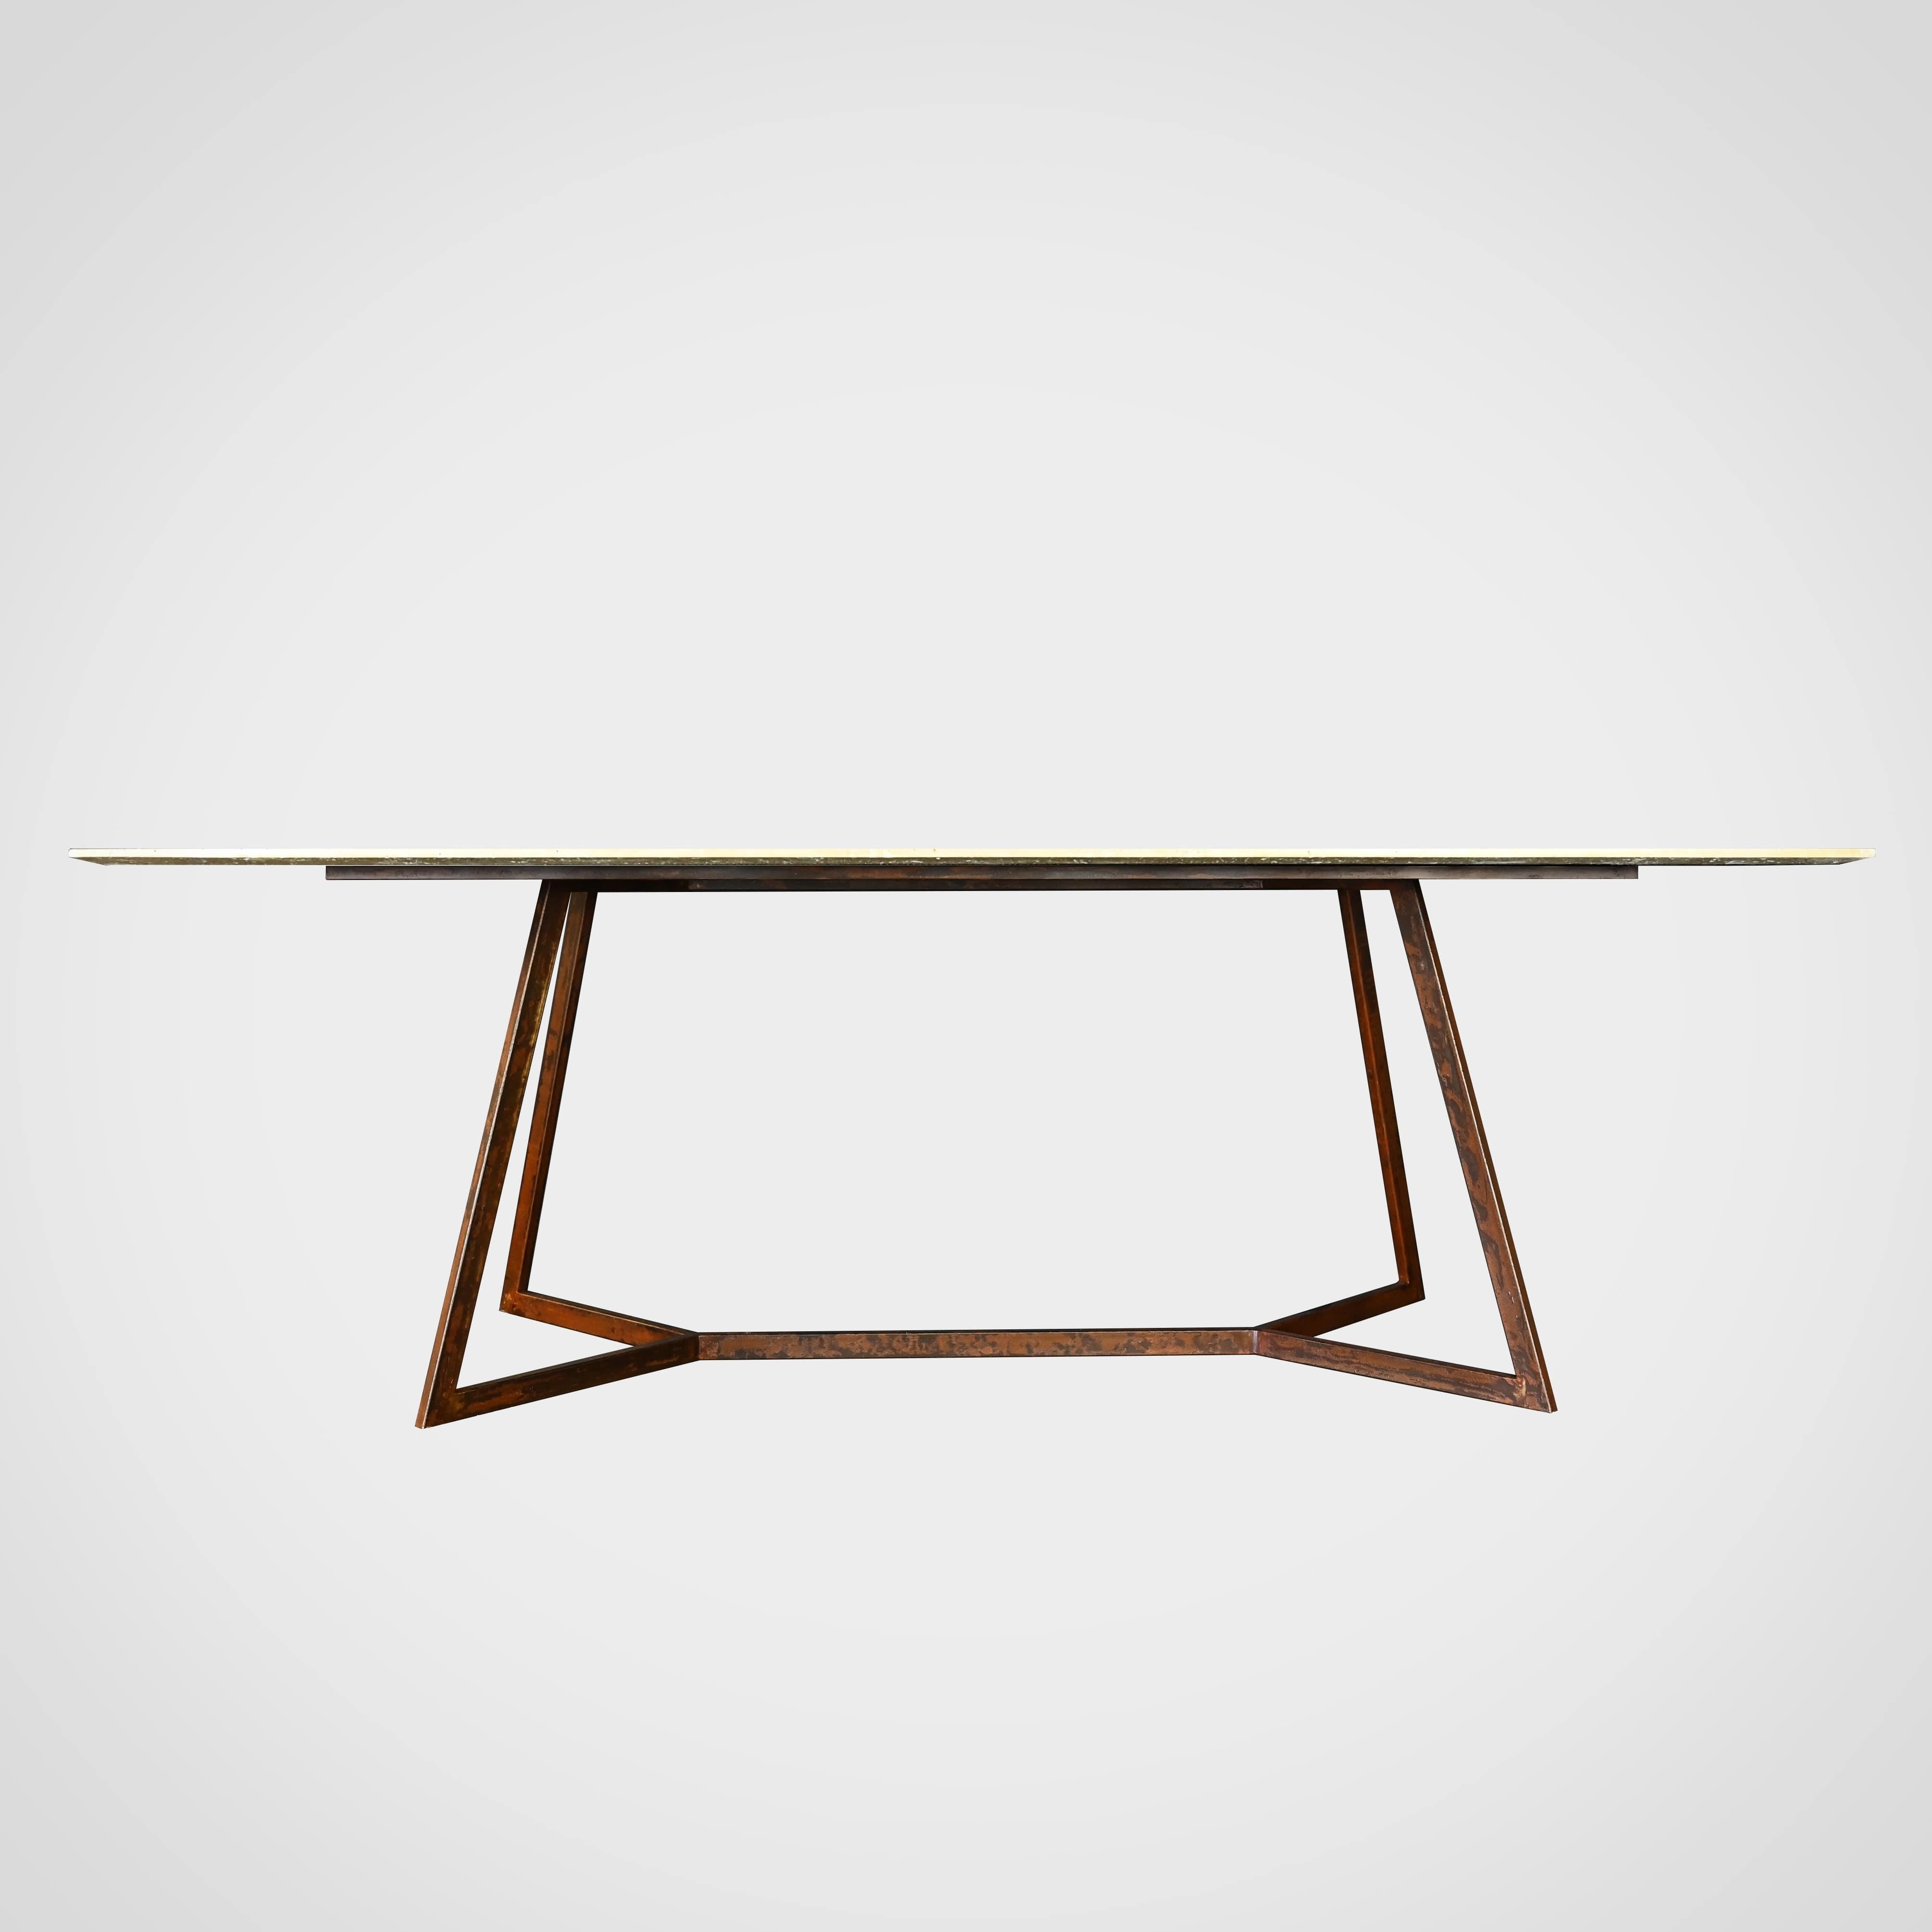 Contemporary Trapeze Tr4 - Travertine Dining Table and Corten steel By DFdesignlab  For Sale